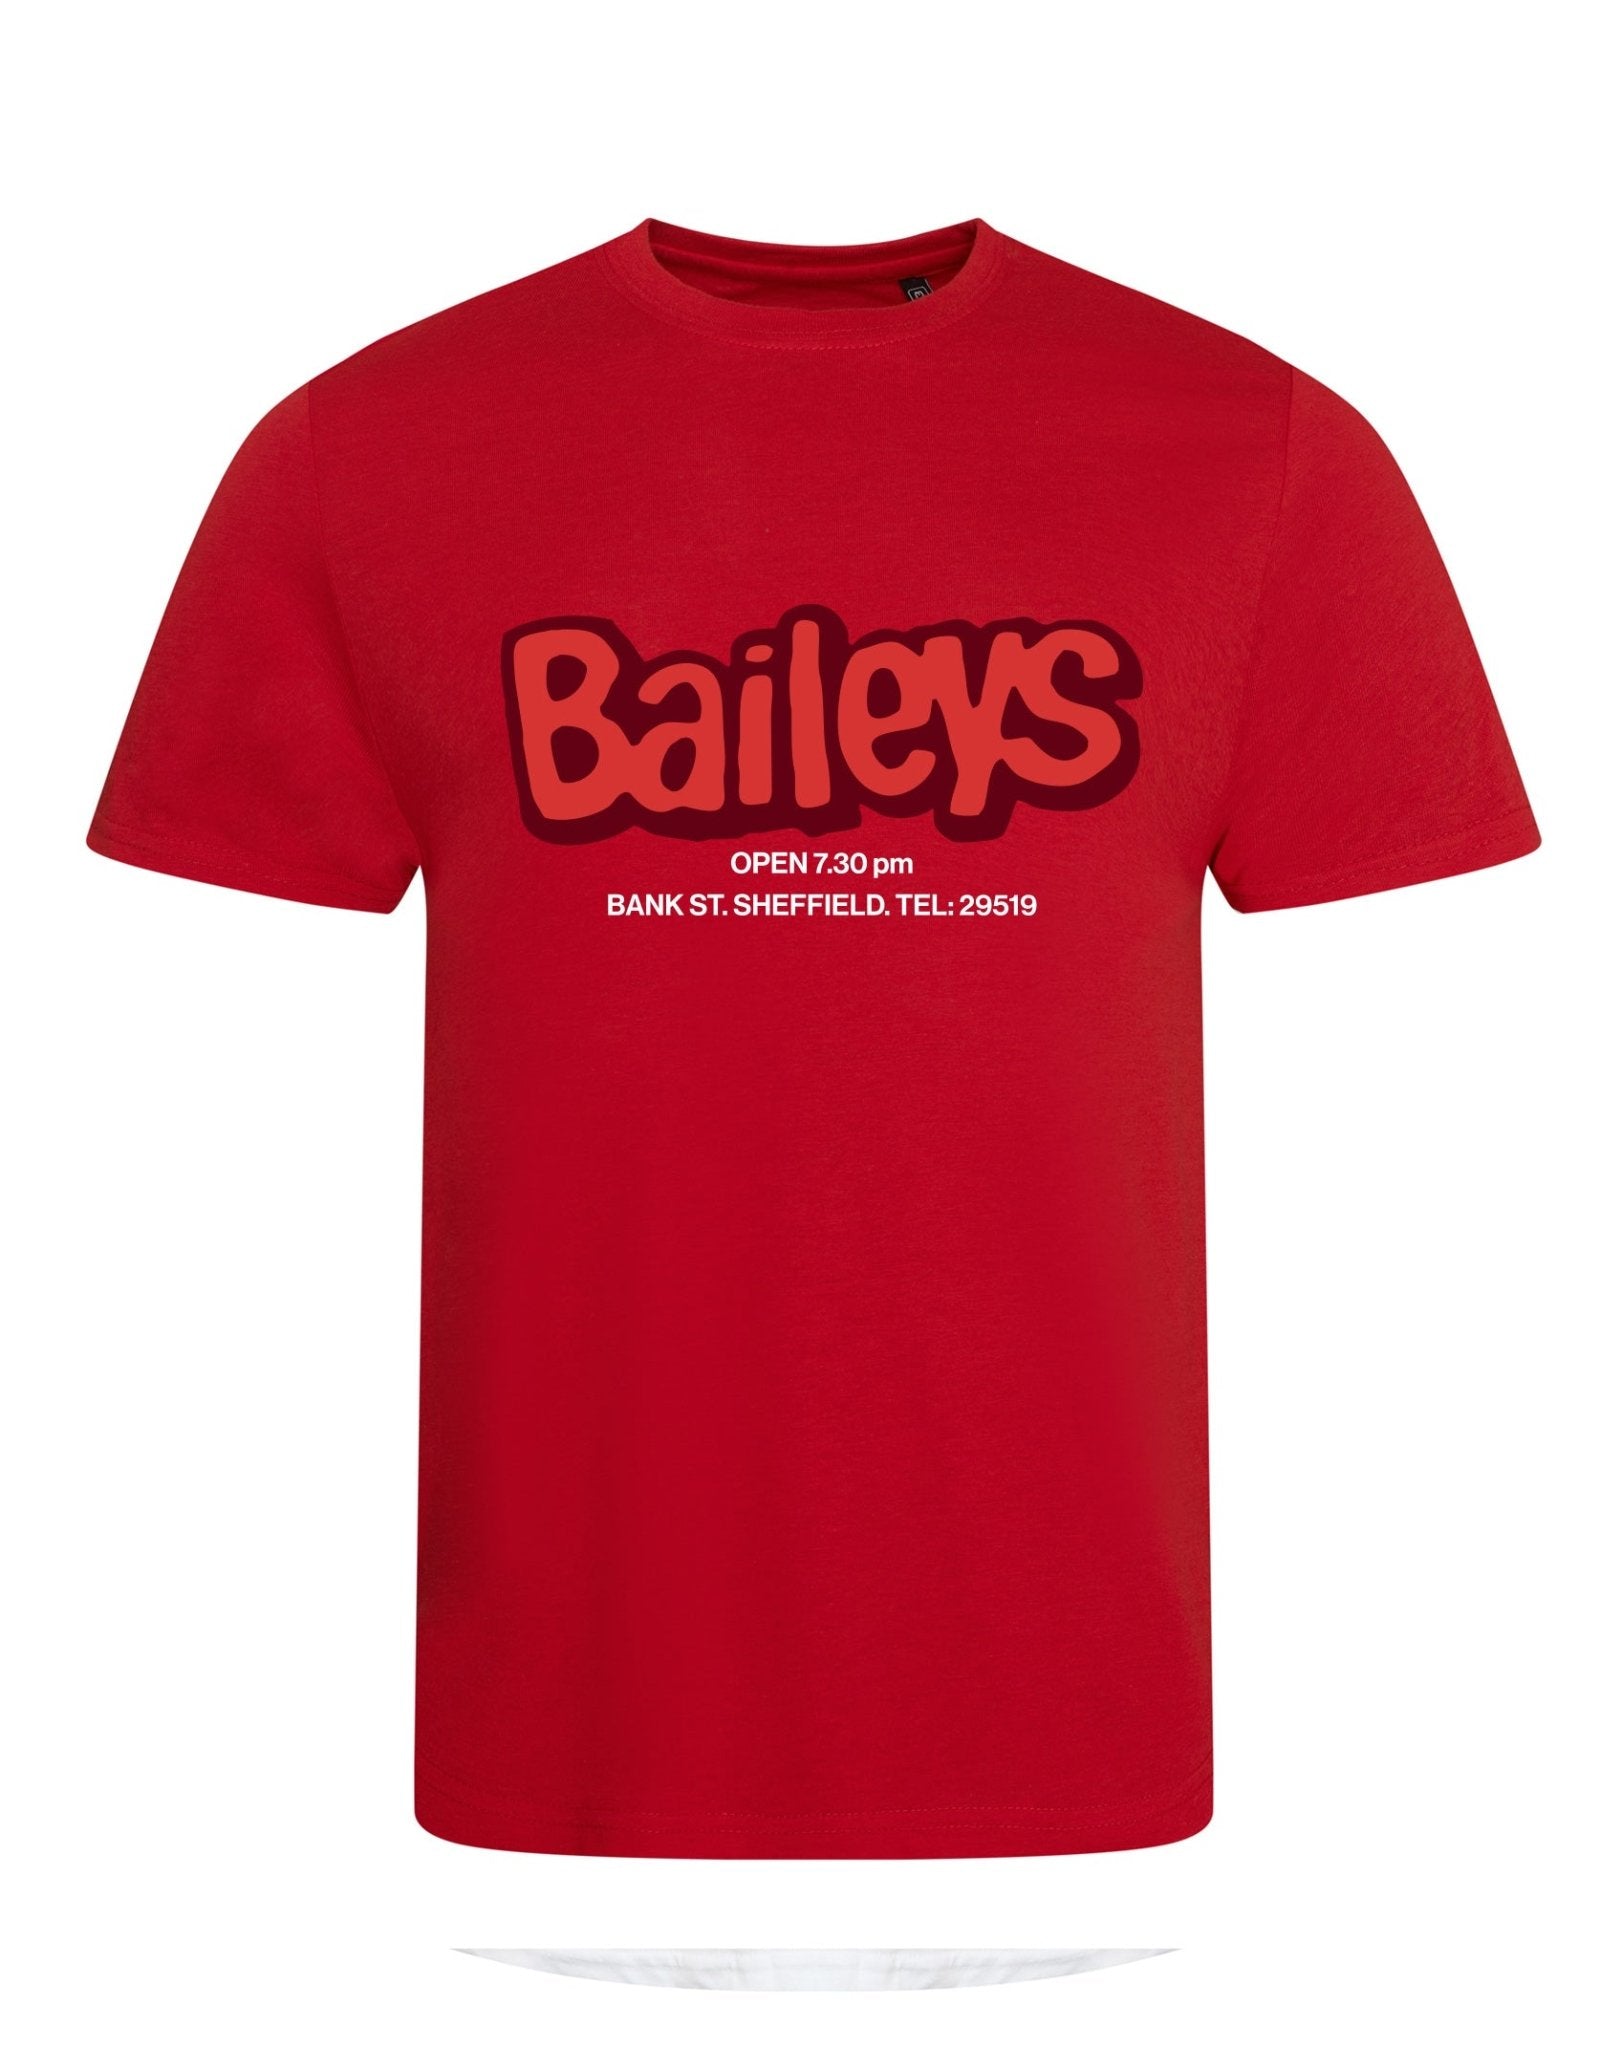 Baileys unisex fit T-shirt - various colours - Dirty Stop Outs